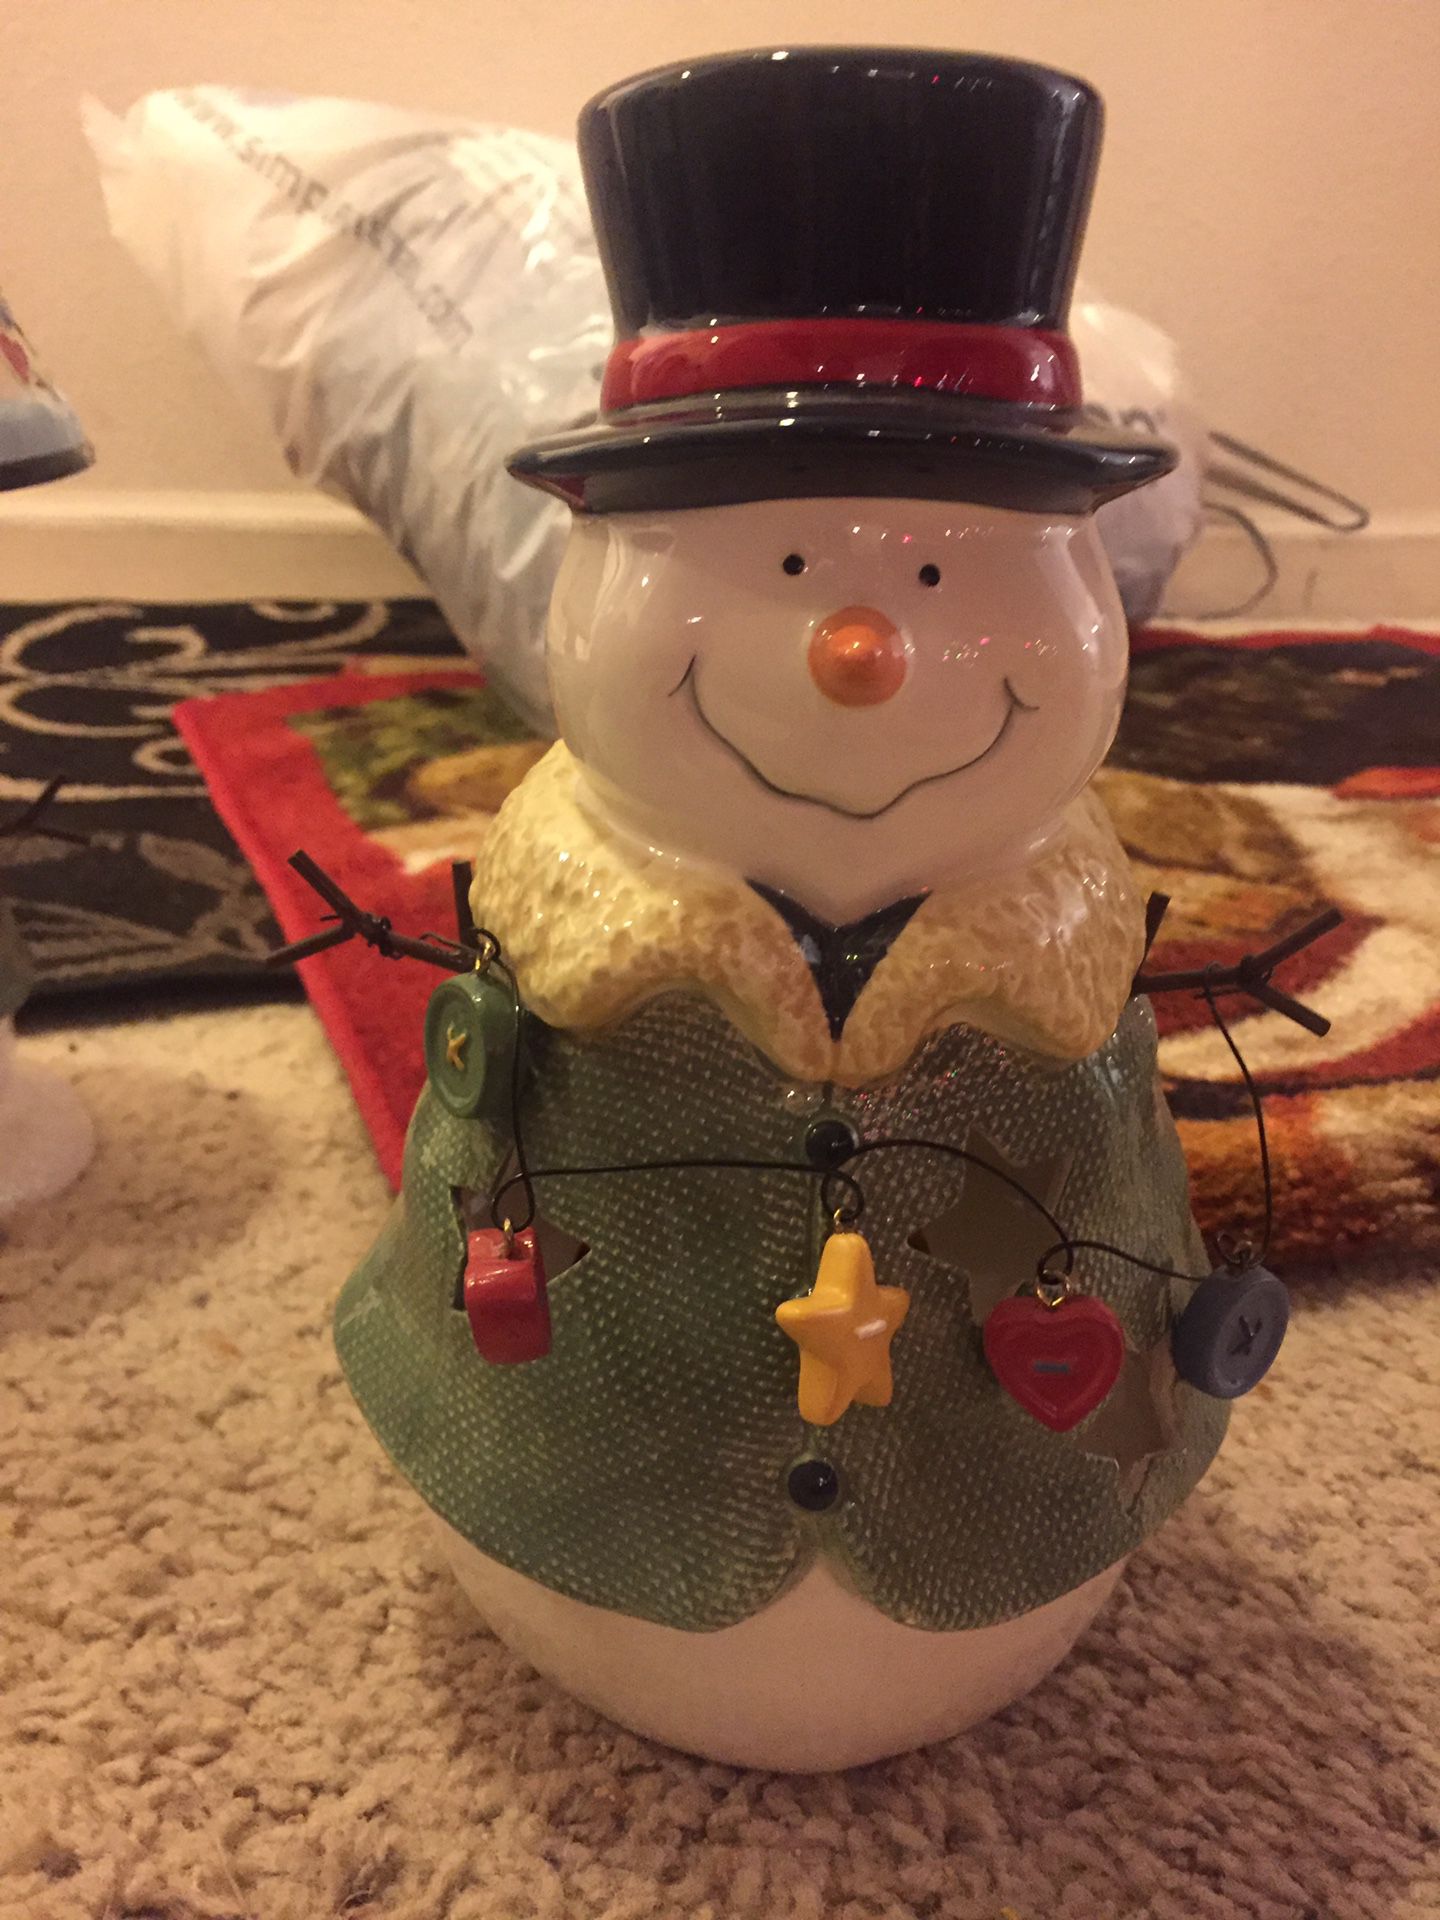 Snowman Christmas decorations. $25 for all!